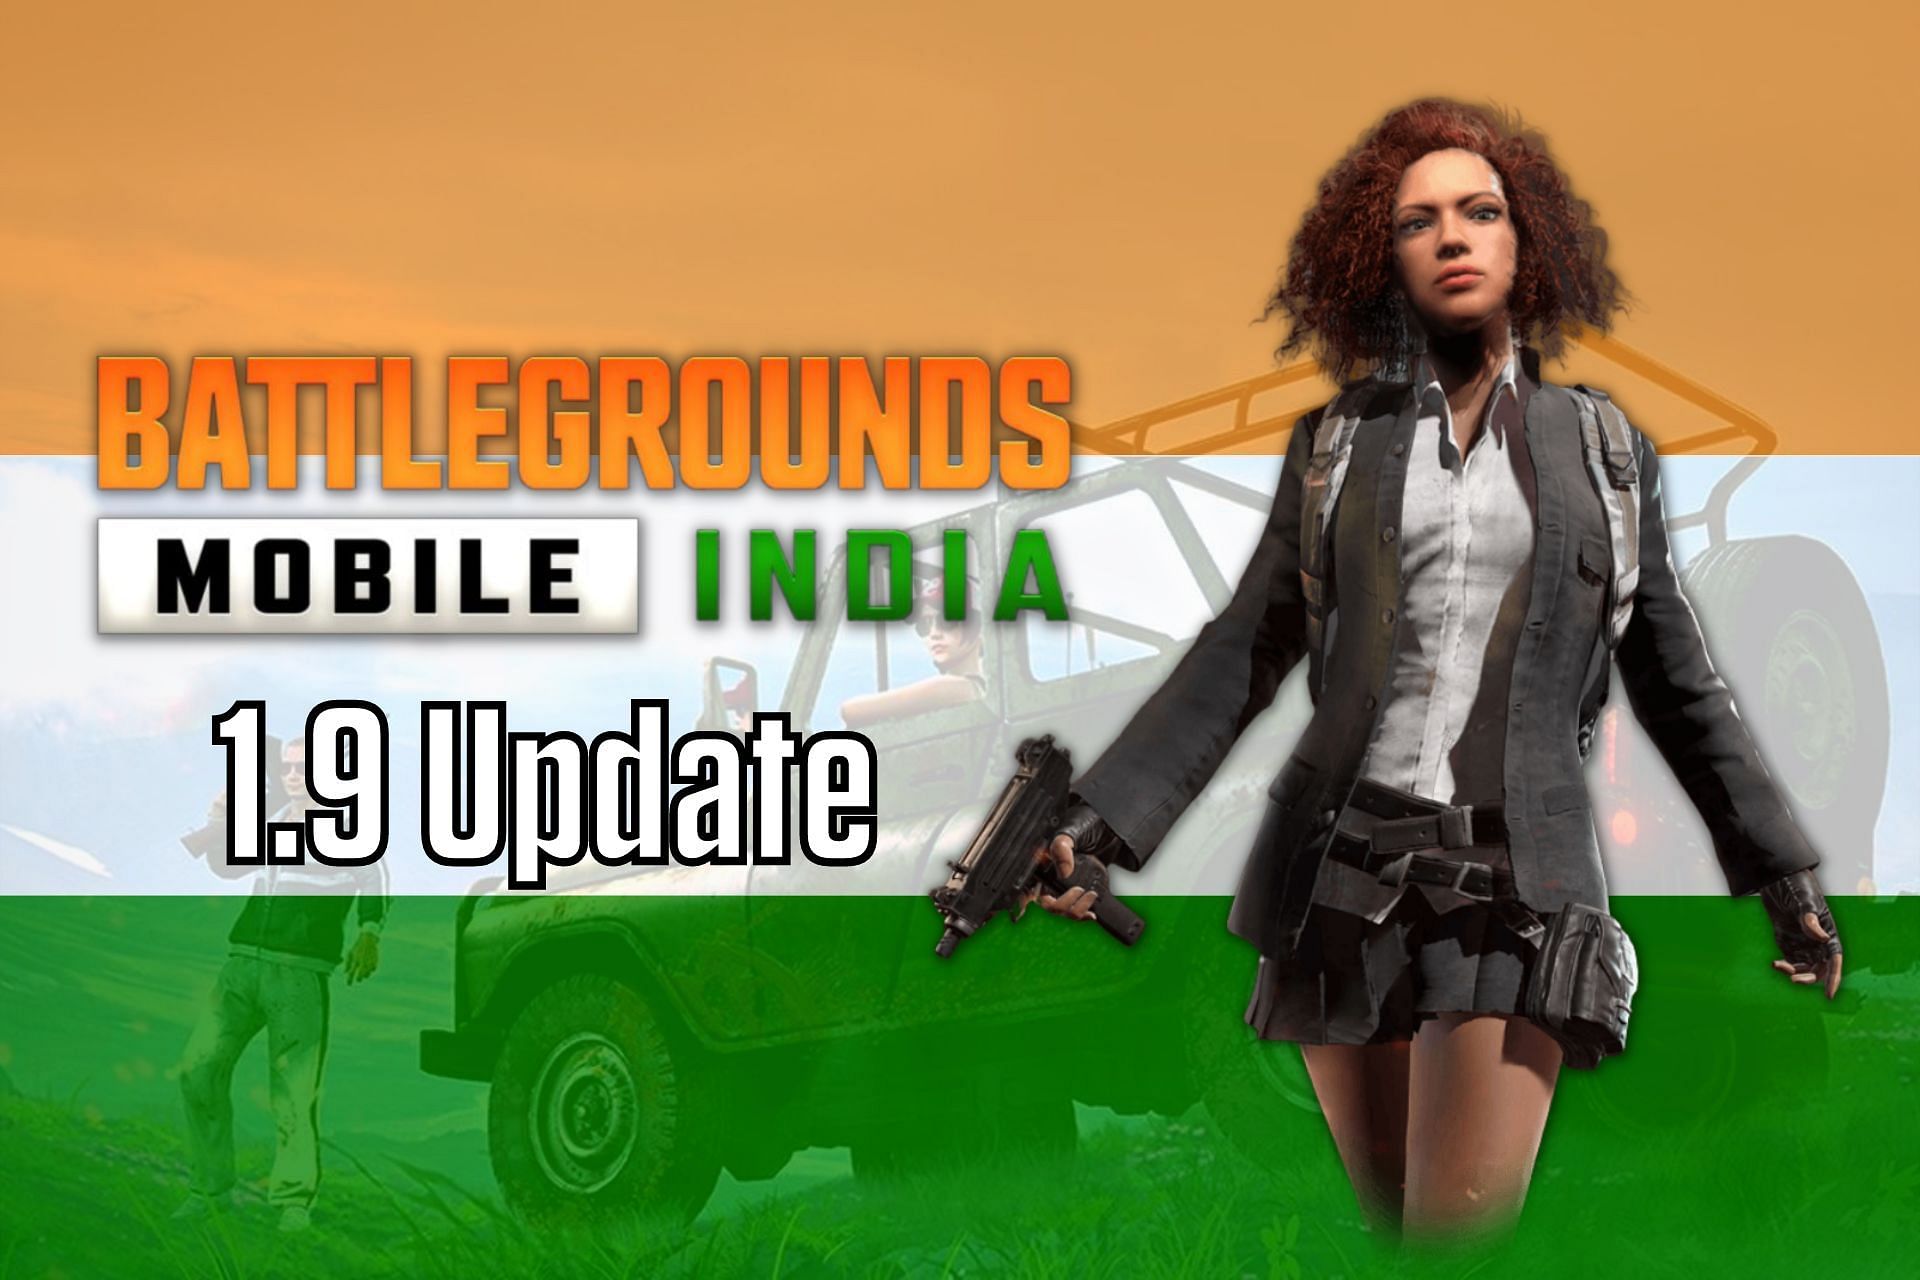 Details about the upcoming 1.9 update in BGMI (Image via Sportskeeda)